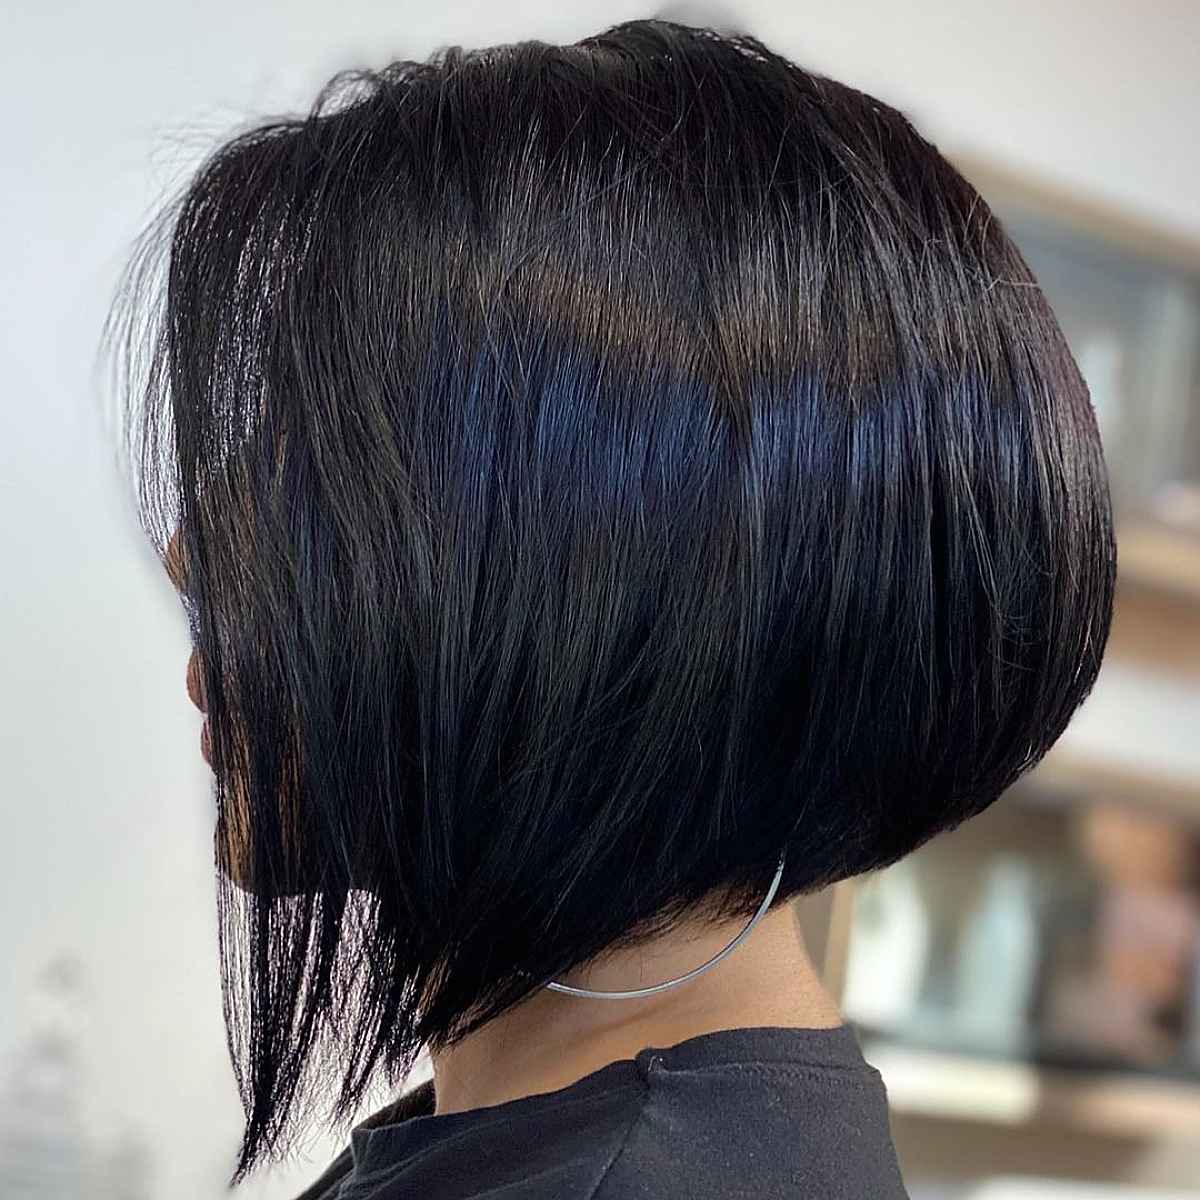 24 Short, Stacked Inverted Bob Haircut Ideas to Spice Up Your Style